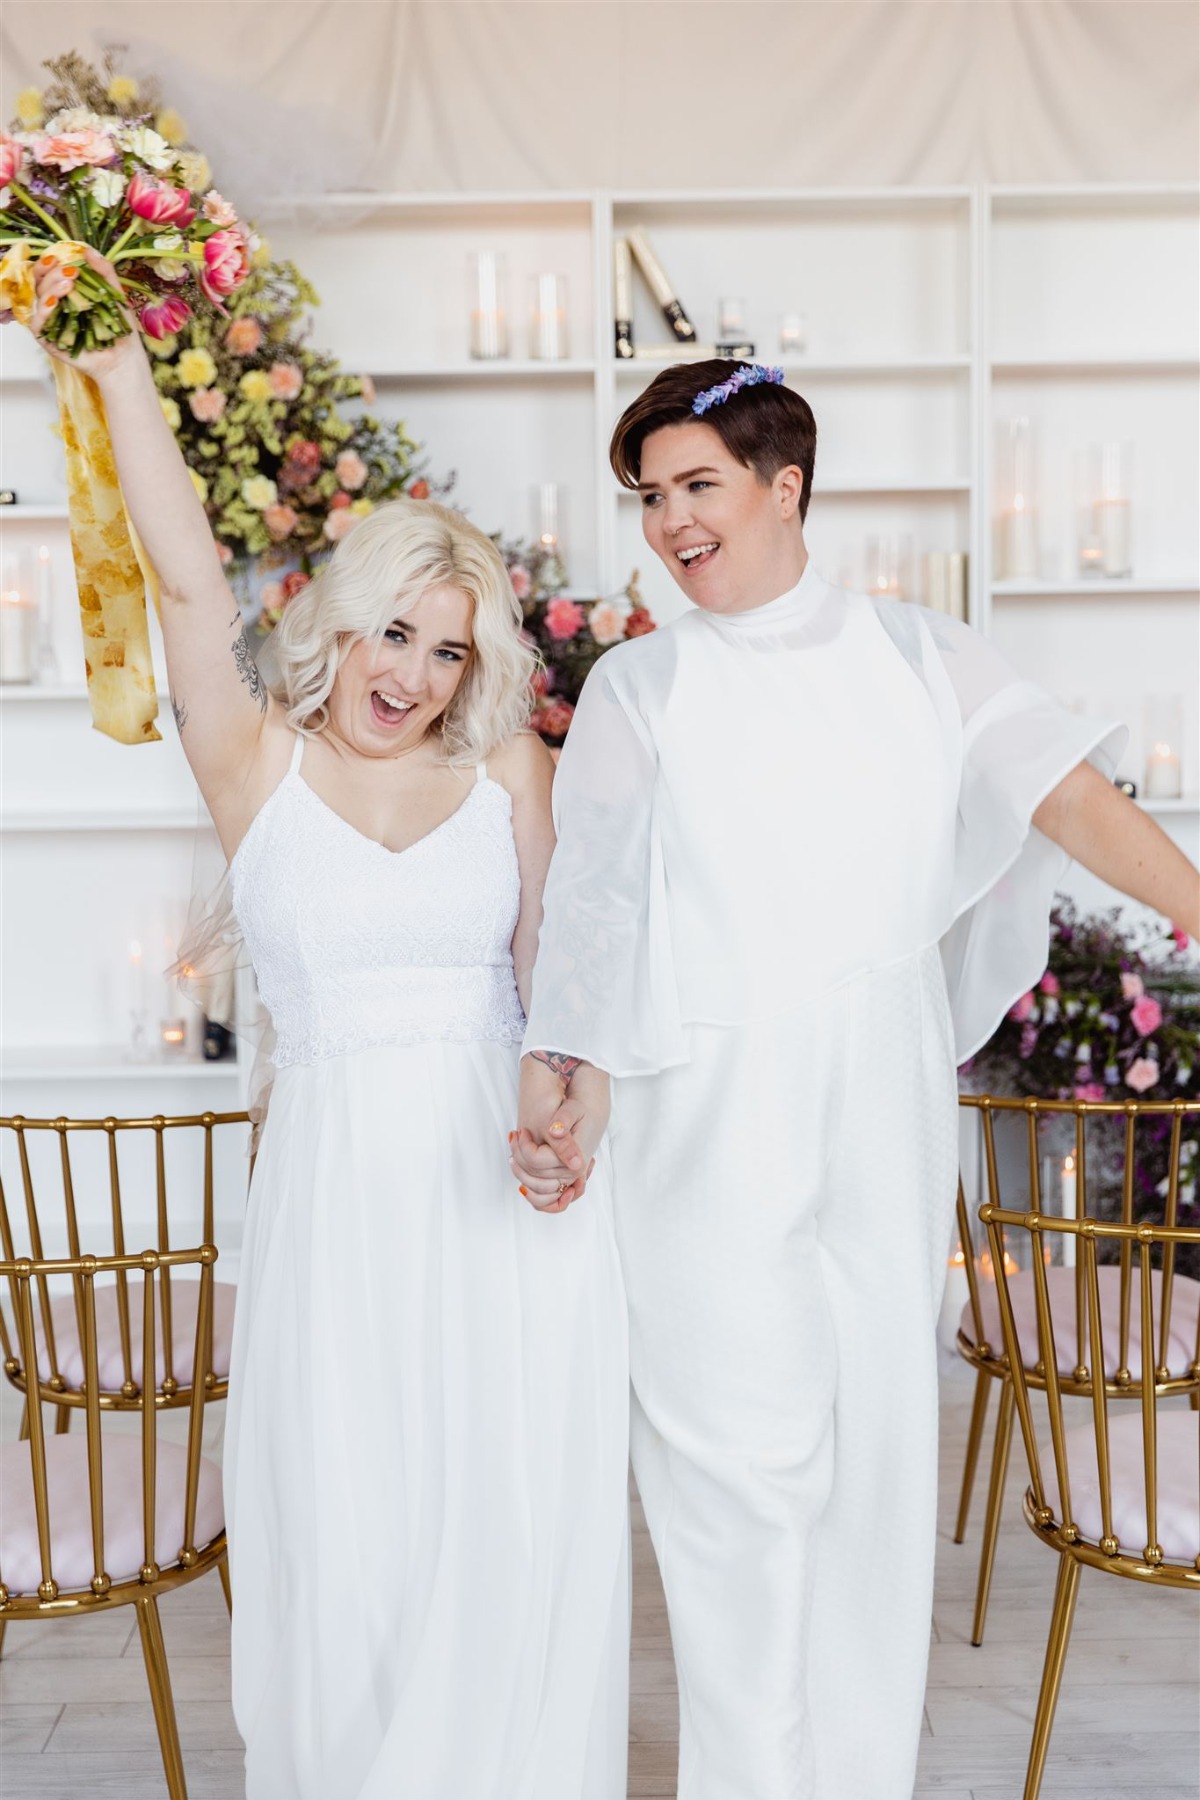 Queer newlywed cheers after ceremony